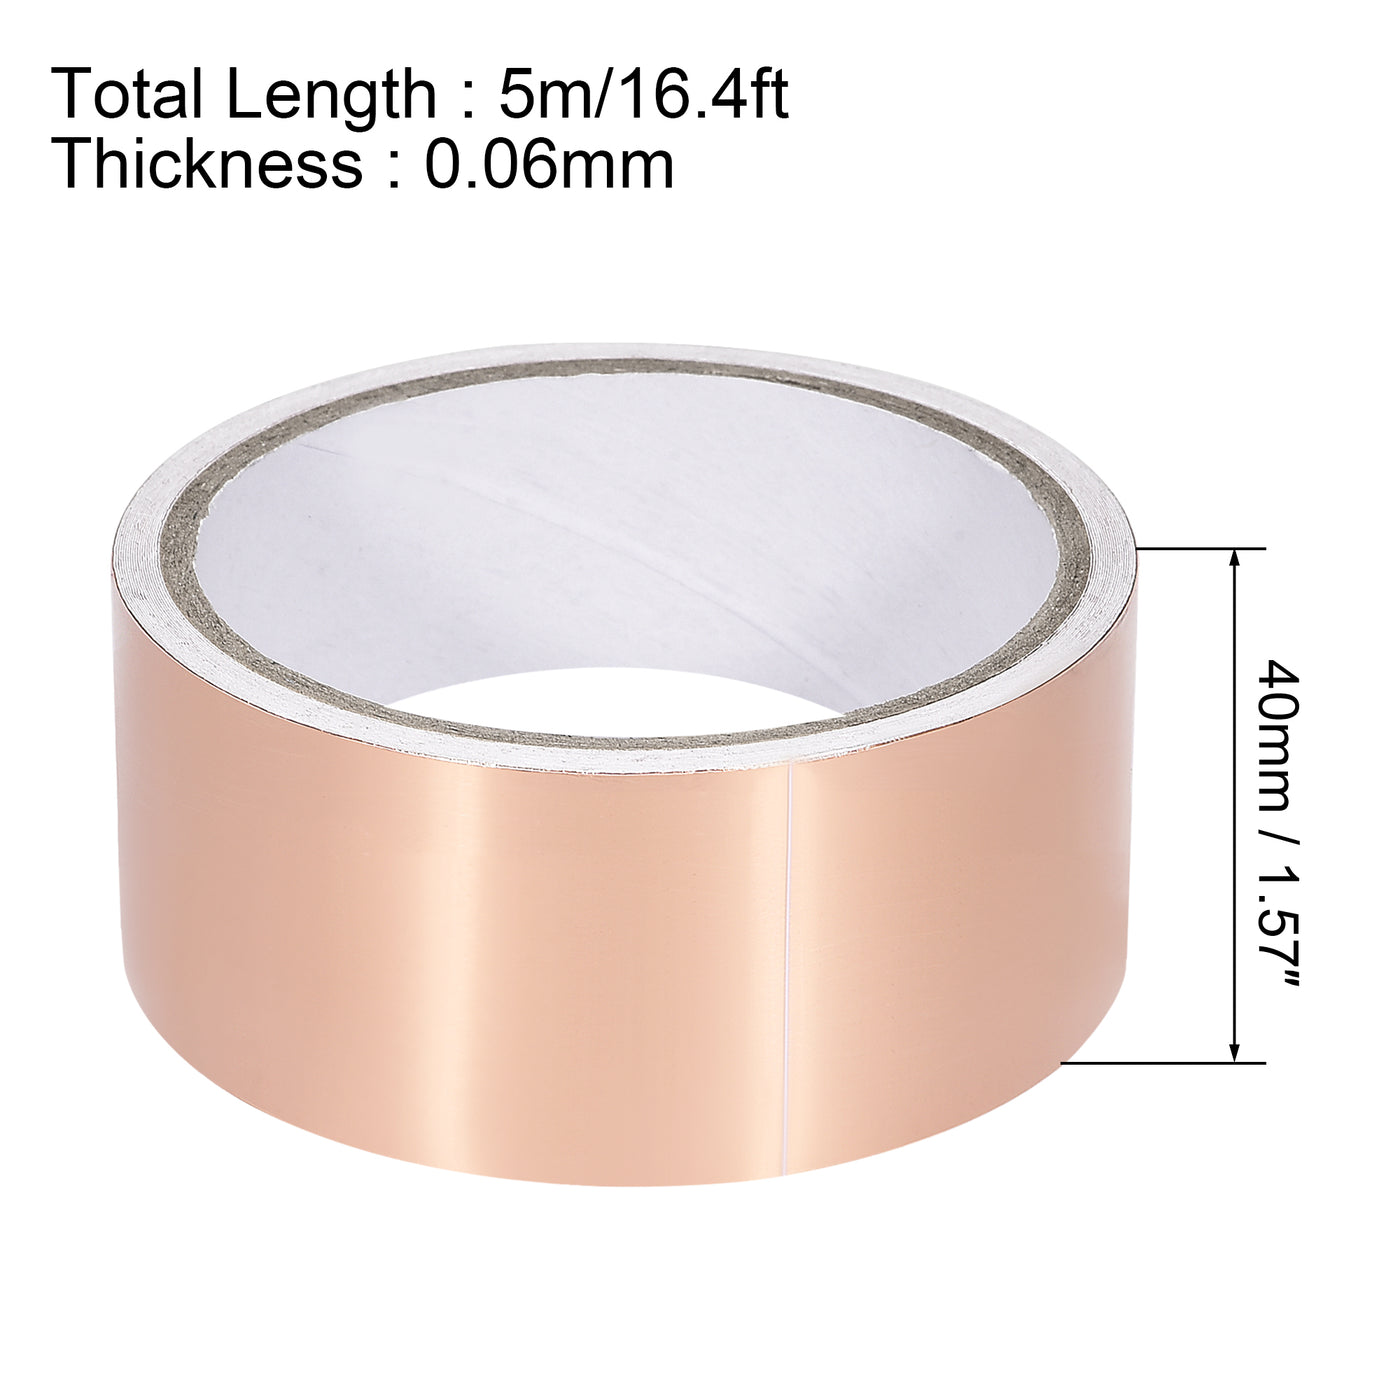 uxcell Uxcell Single-Sided Conductive Tape Copper Foil Tape 40mm x 5m/16.4ft for EMI Shielding 2pcs